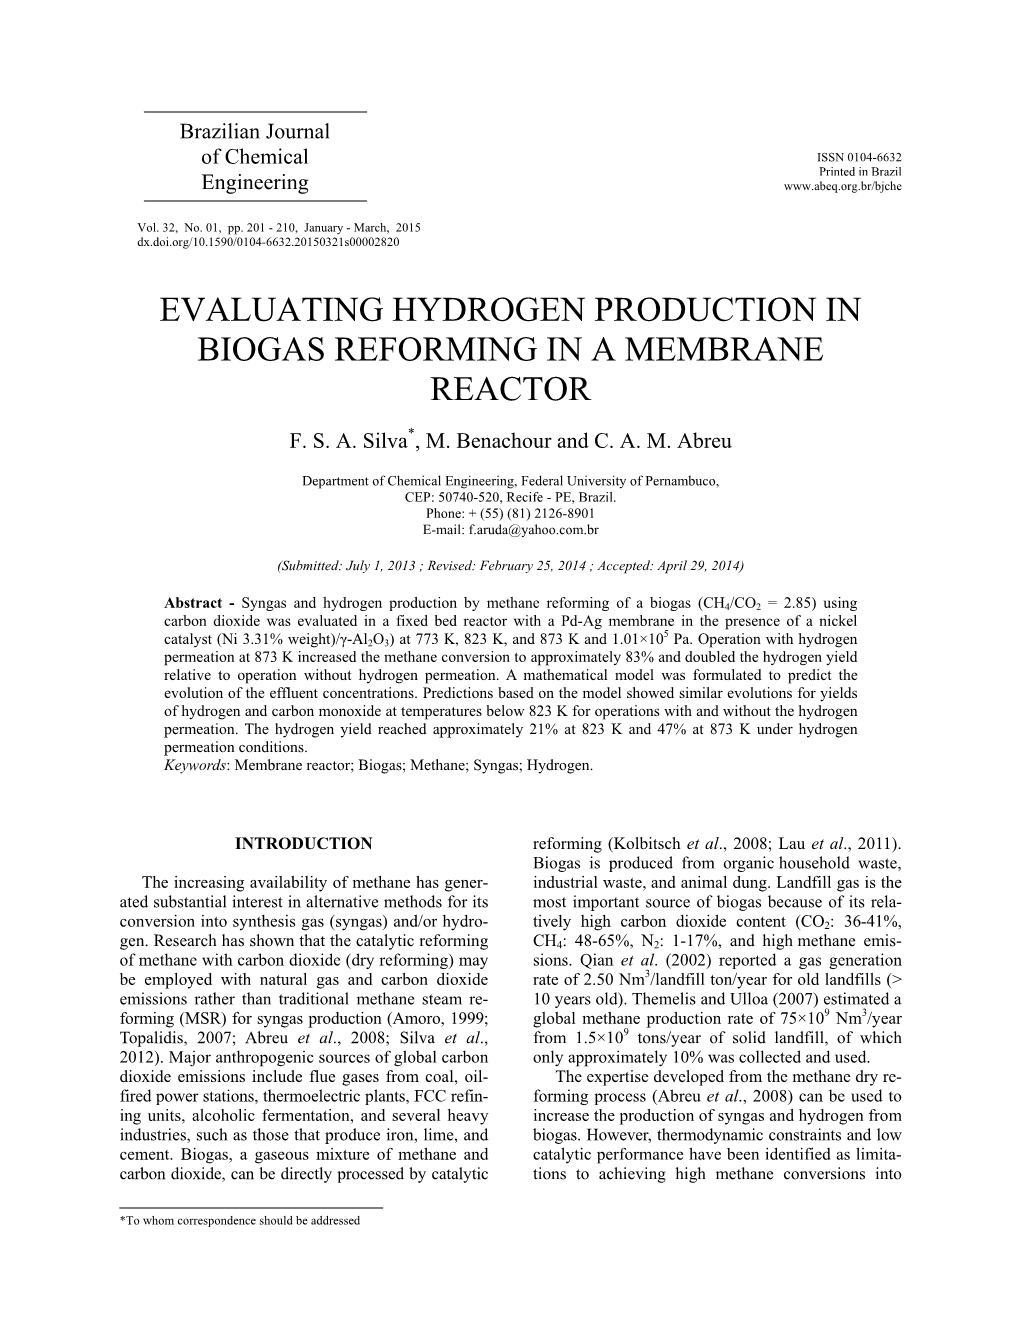 Evaluating Hydrogen Production in Biogas Reforming in a Membrane Reactor